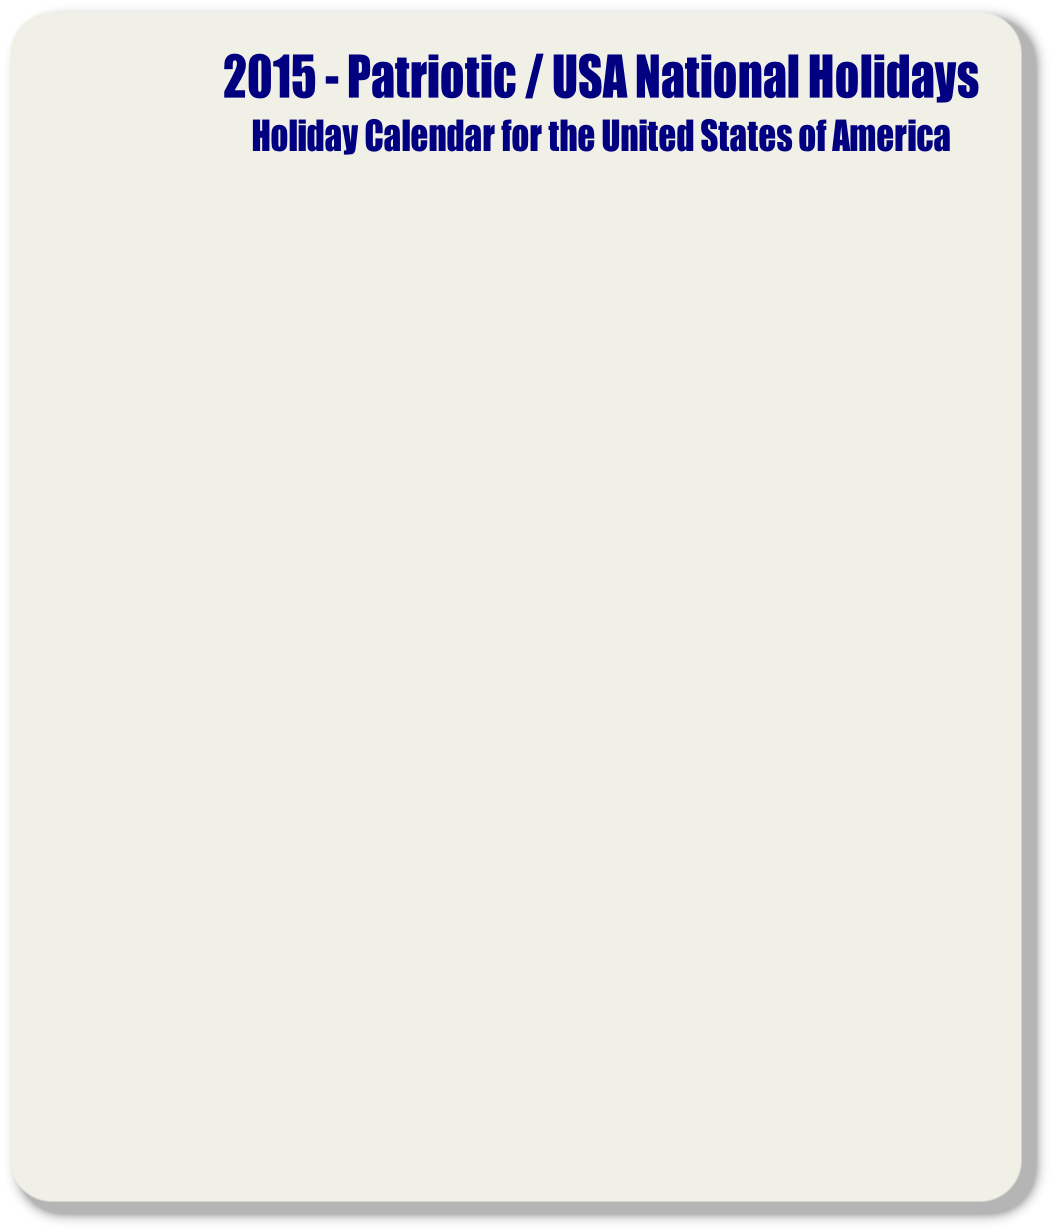 2015 - Patriotic / USA National Holidays
Holiday Calendar for the United States of America
